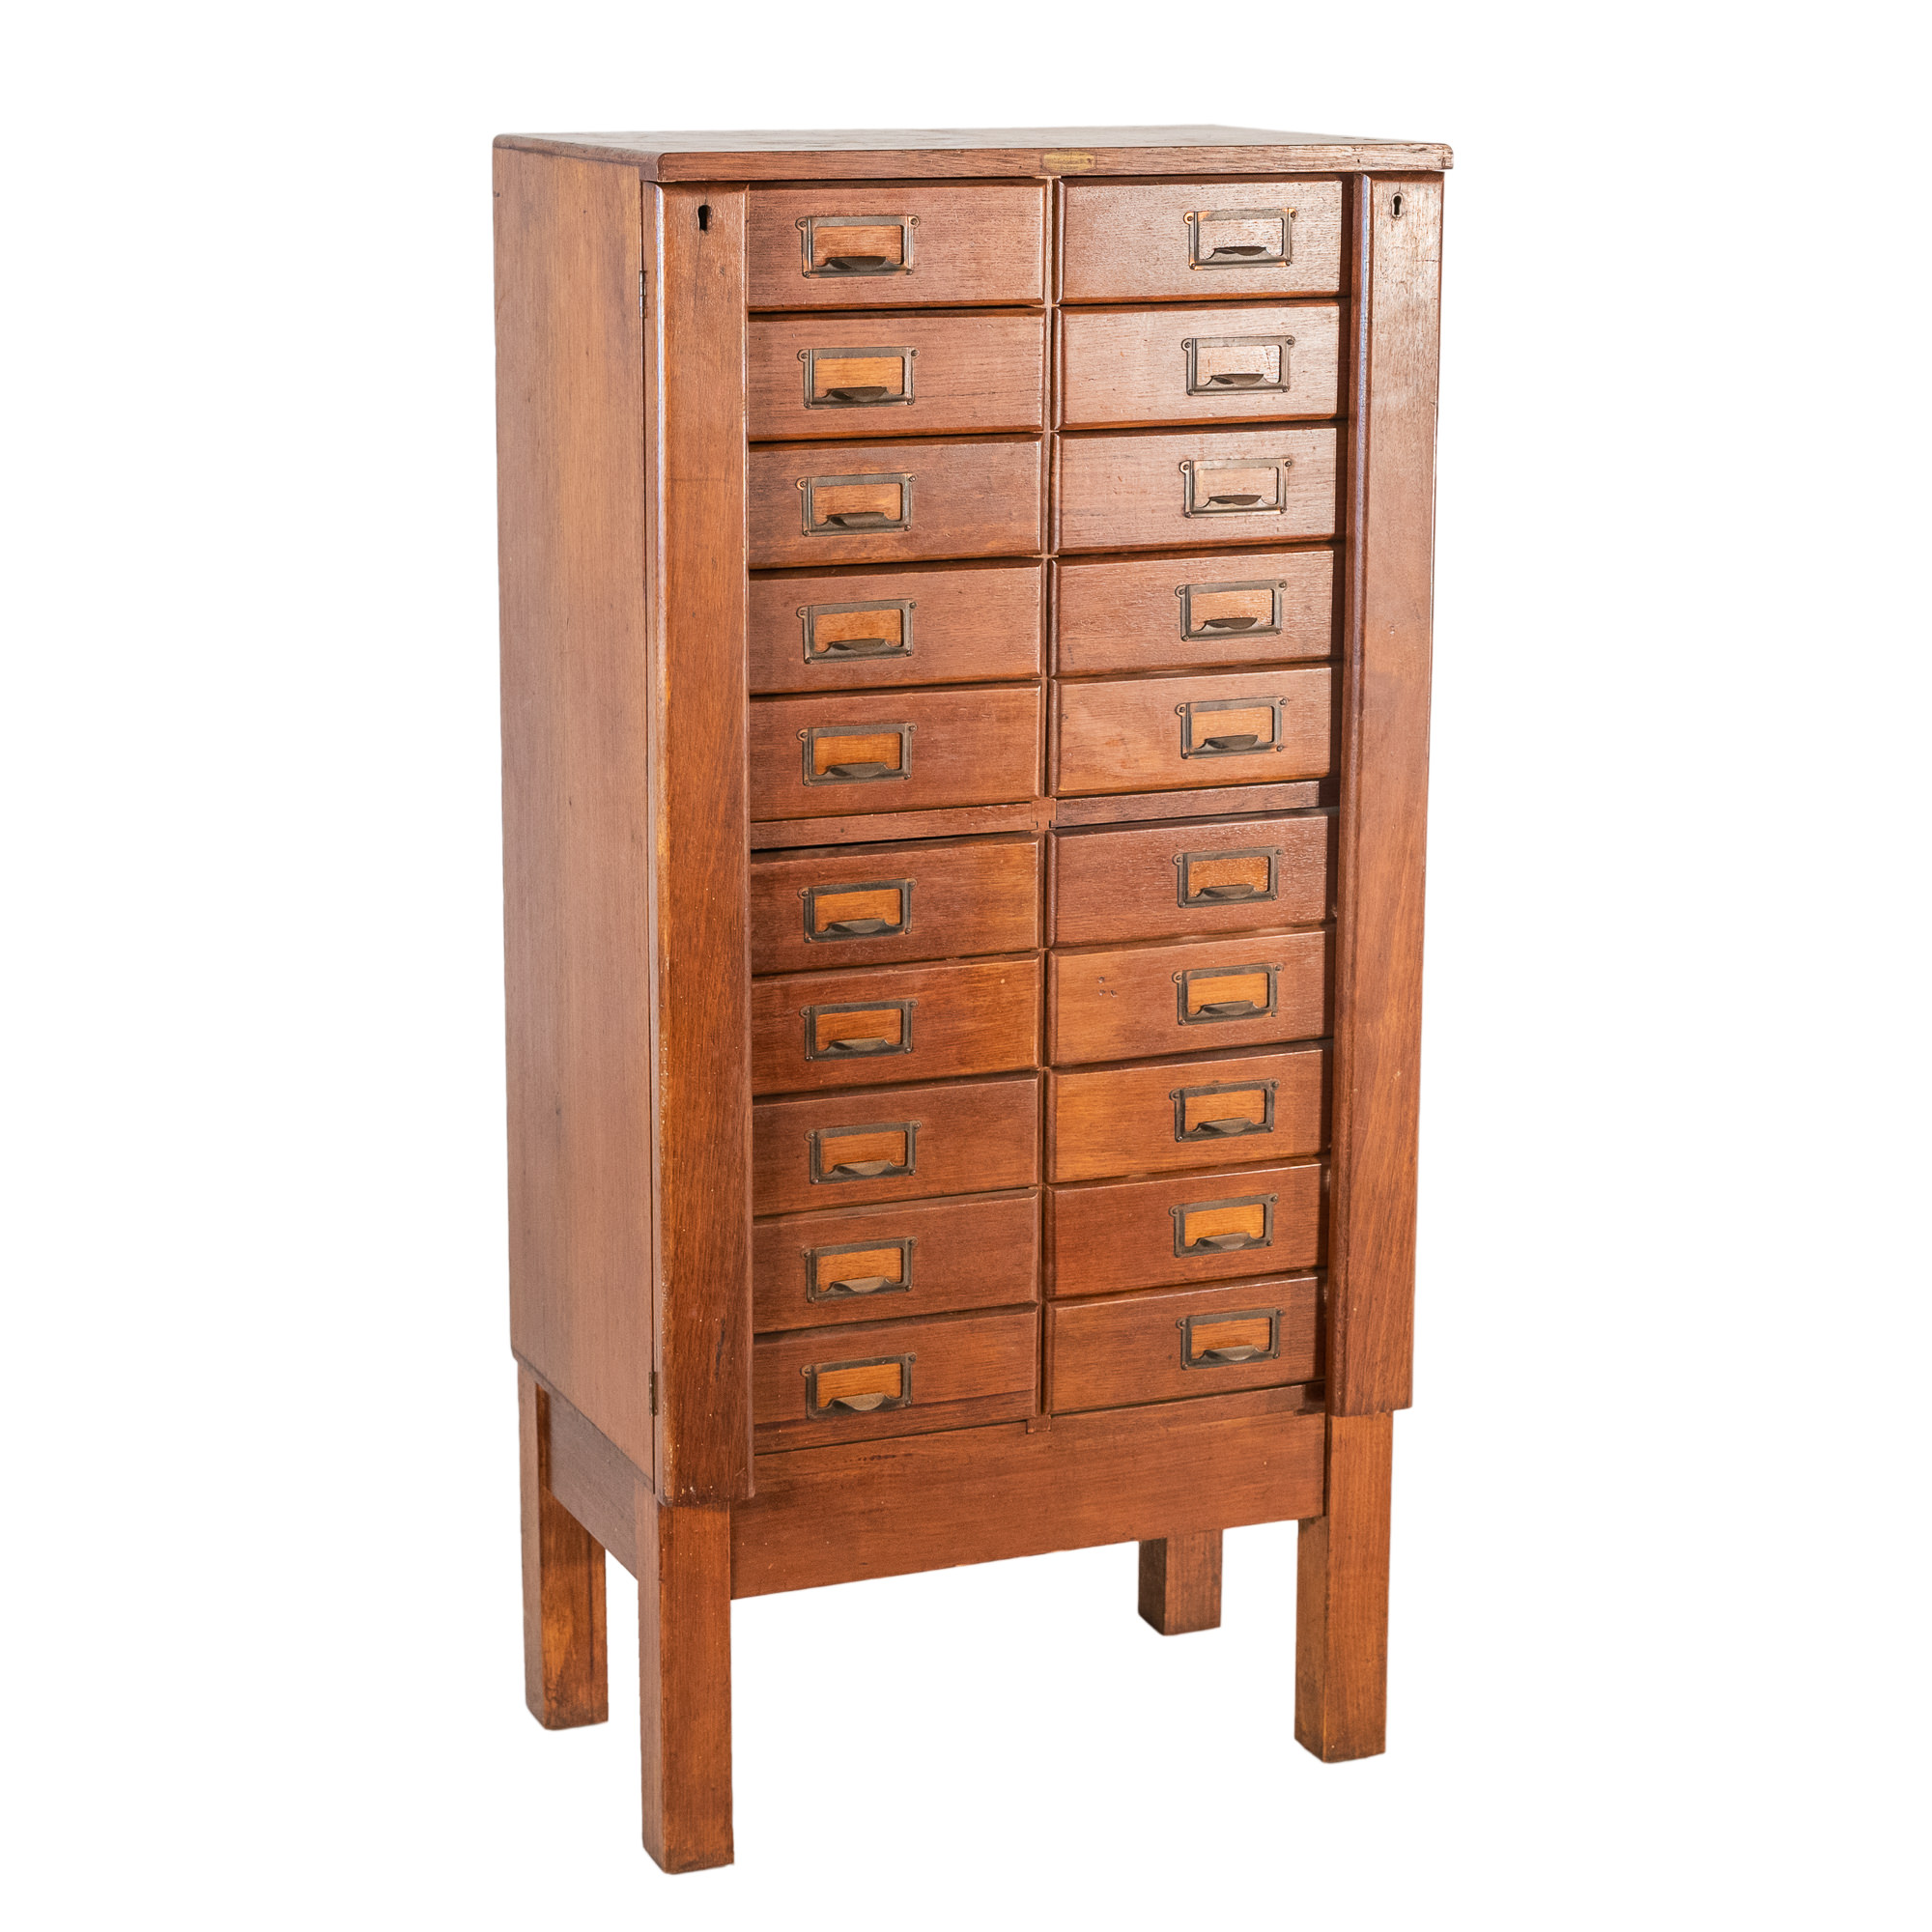 'Set of Oak File Drawers Stamped Supplied by Office Equipment Pty Ltd Sydney Circa 1930'